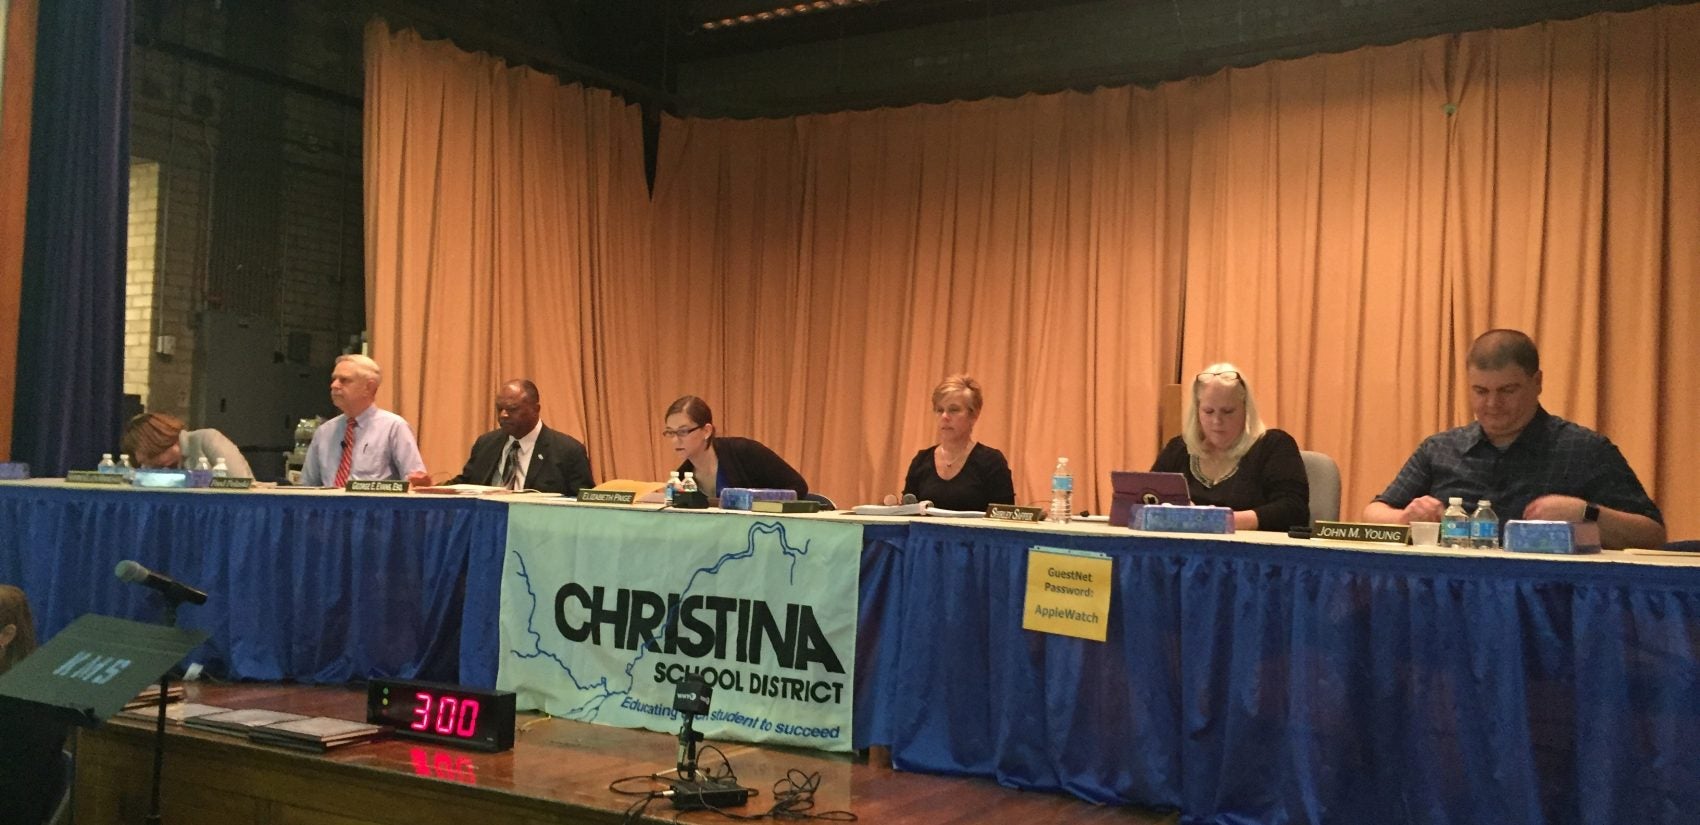 The Christina school board will have to decide what to do about several schools that are far below capacity once the district's analysis is completed. (Cris Barrish/WHYY)